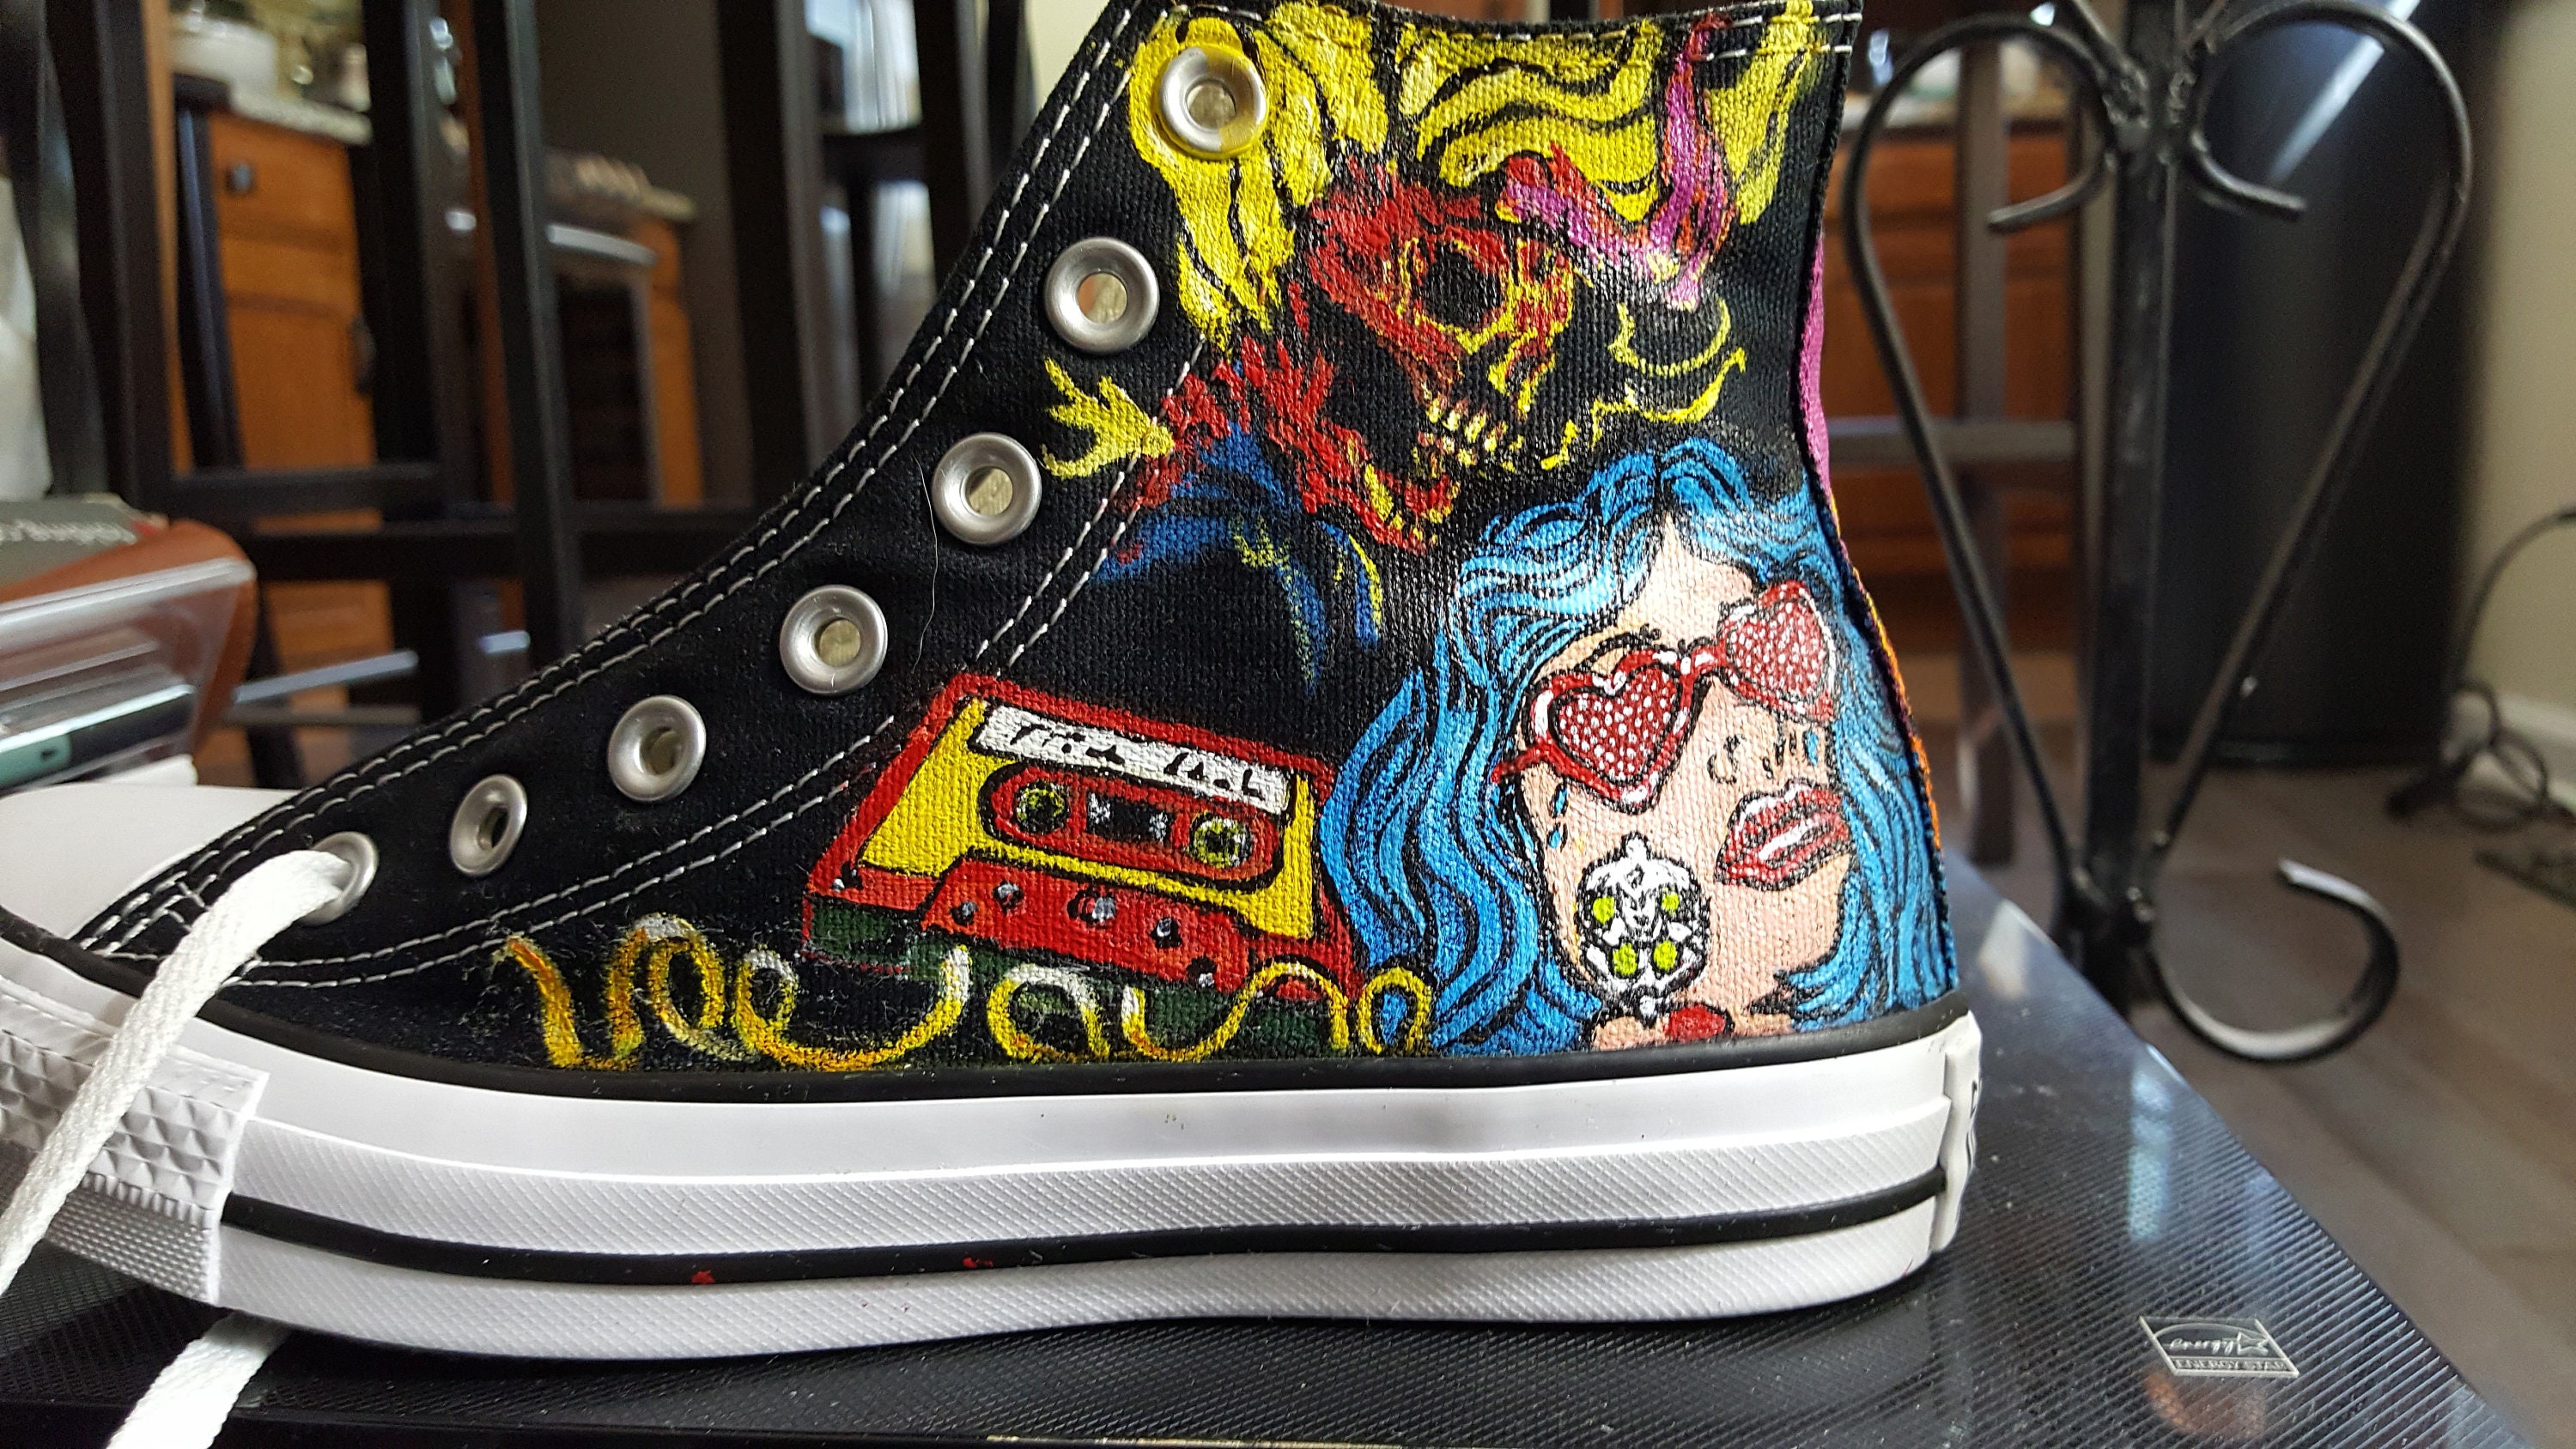 Converse Shoes Hand Painted 1990's Rock Graphic Nirvana - Etsy